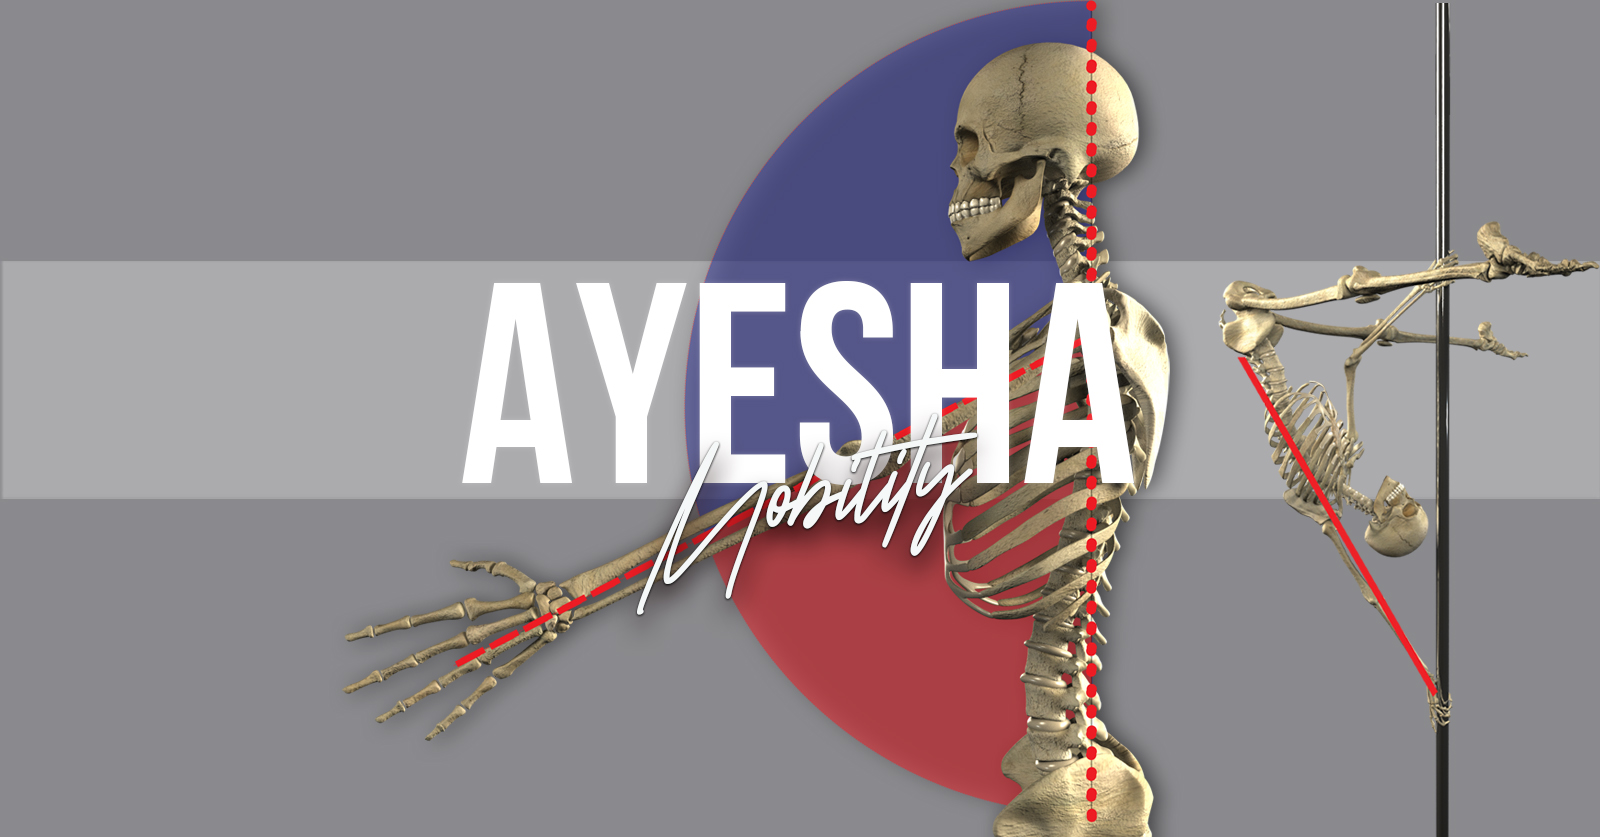 Ayesha mobility? Not just overhead, STRONG overhead!